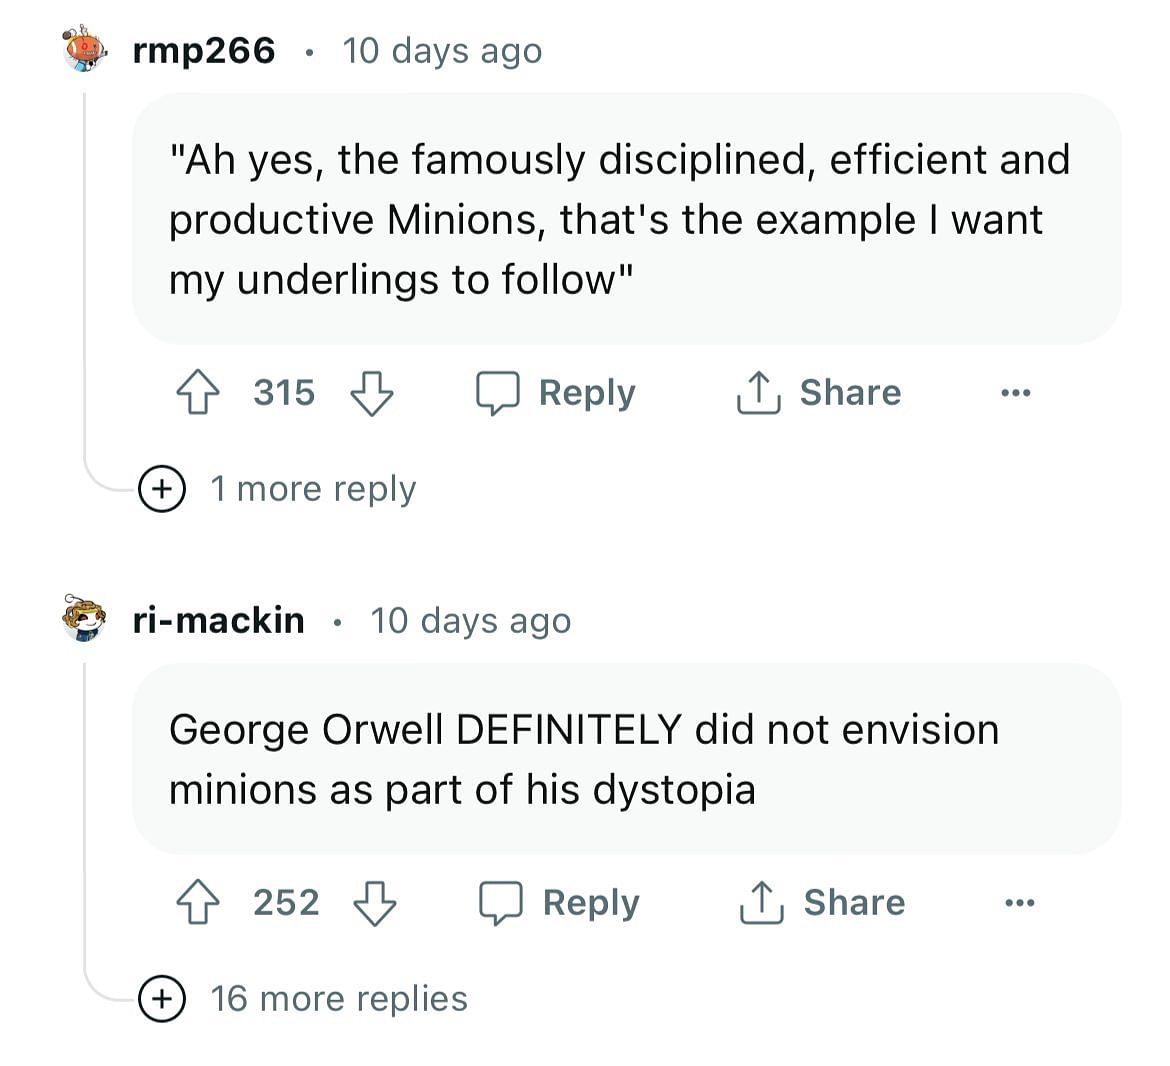 A Redditor commented under the viral post, "Ah yes, the famously disciplined, efficient and productive Minions..."